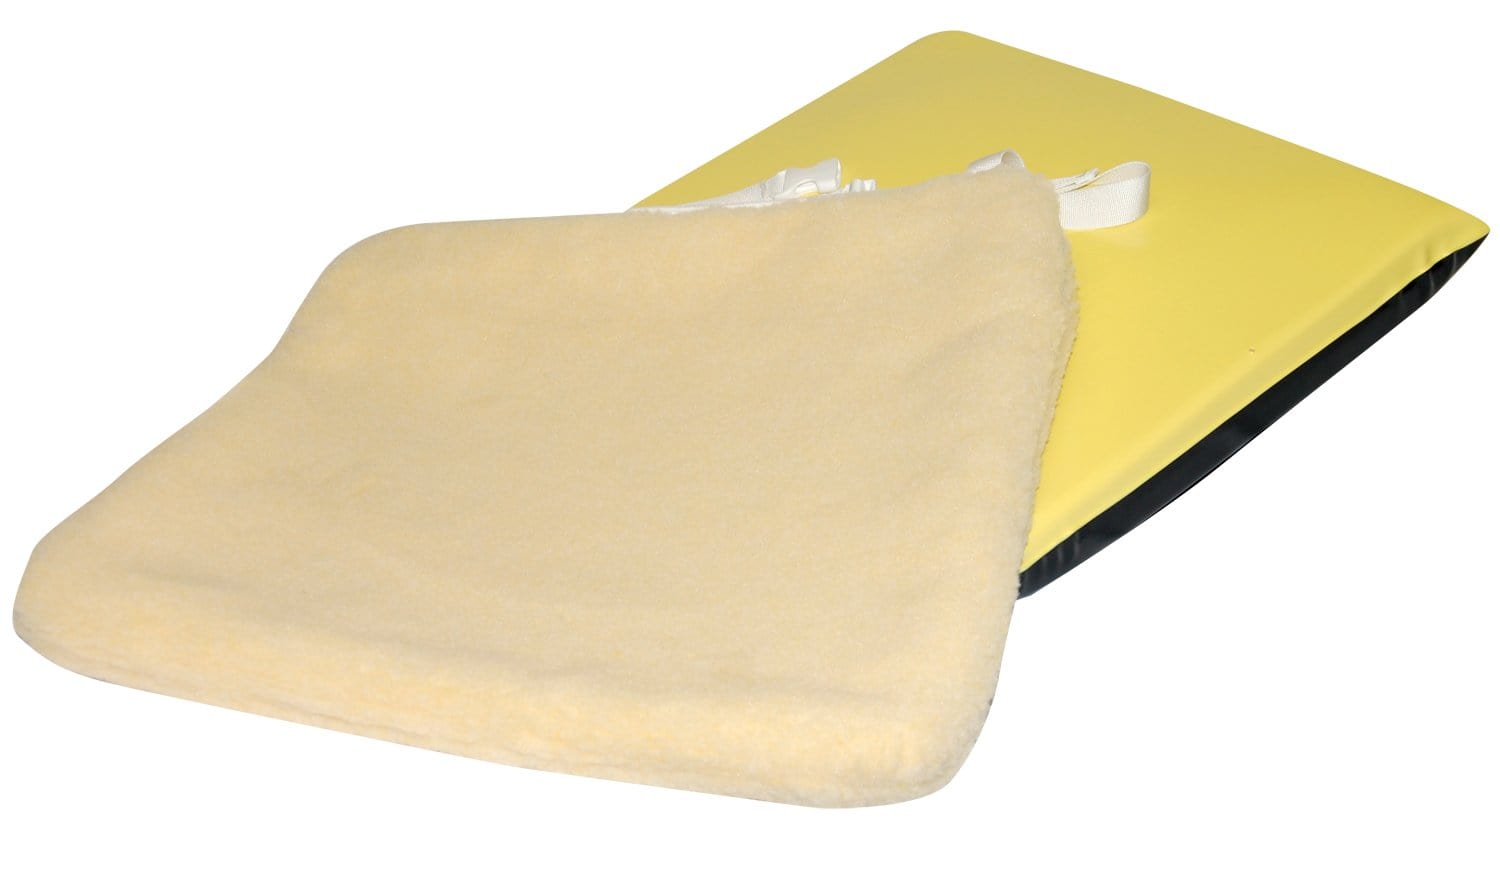 SkilCare Cushions 16" SkilCare Econo-Gel 16" Cushion with Sheepskin Cover